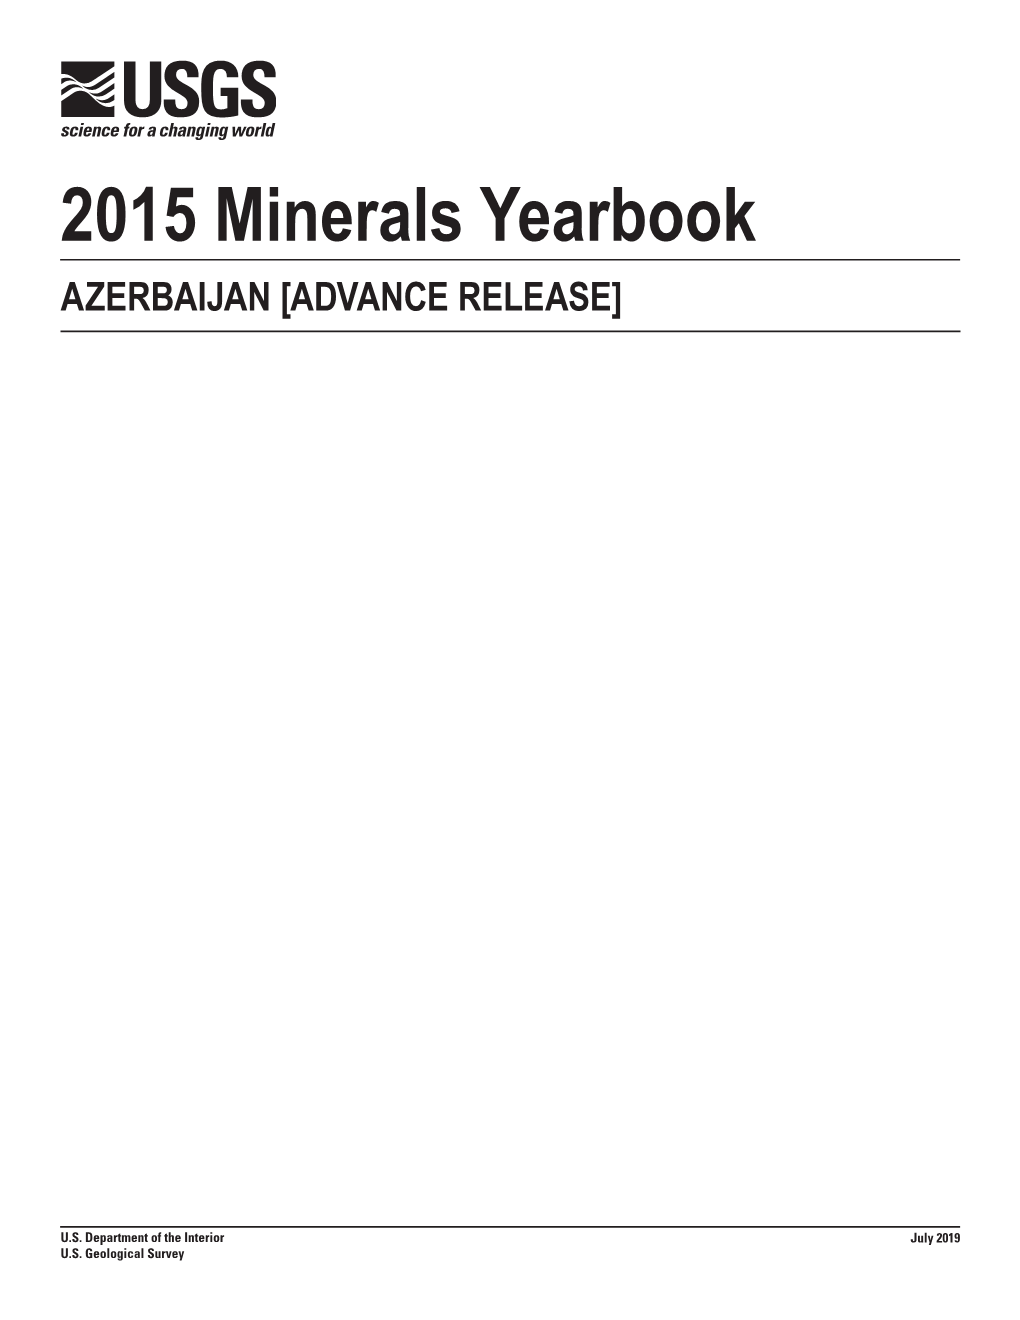 The Mineral Industry of Azerbaijan in 2015